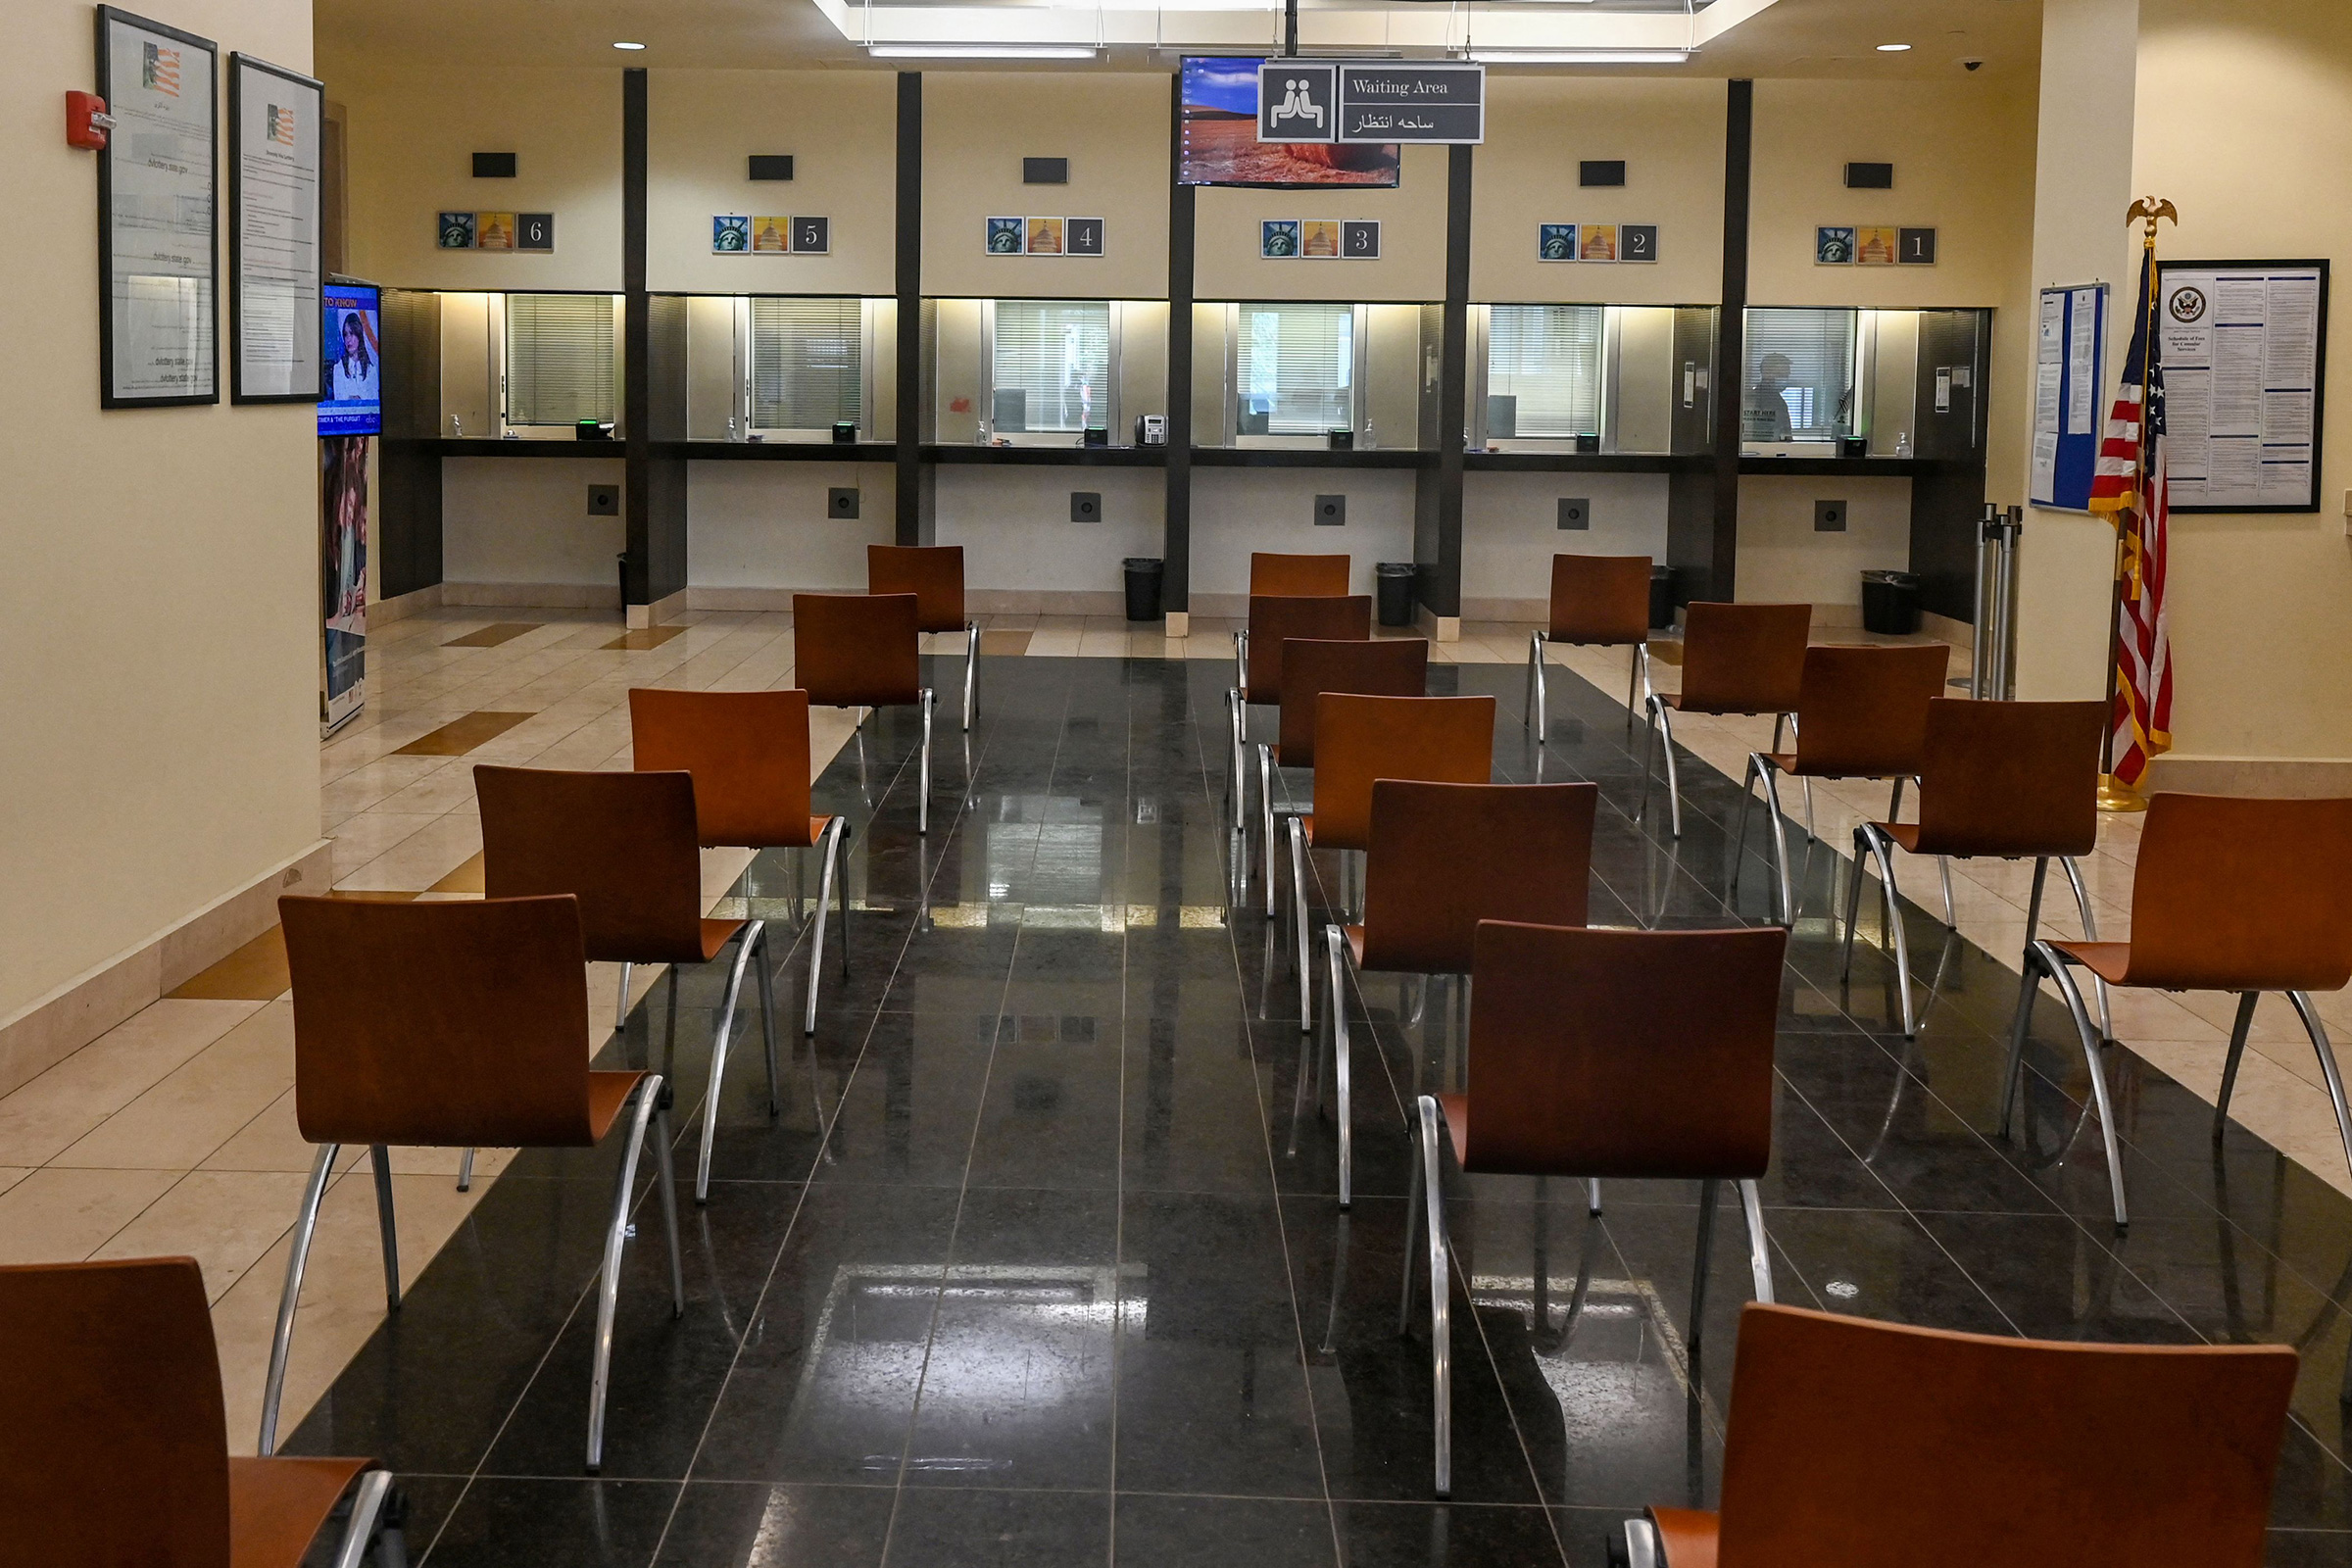 A deserted view of the consular section at the U.S. embassy in Kabul, Afghanistan on July 30, 2021. (Sajjad Hussain—AFP/Getty Images)